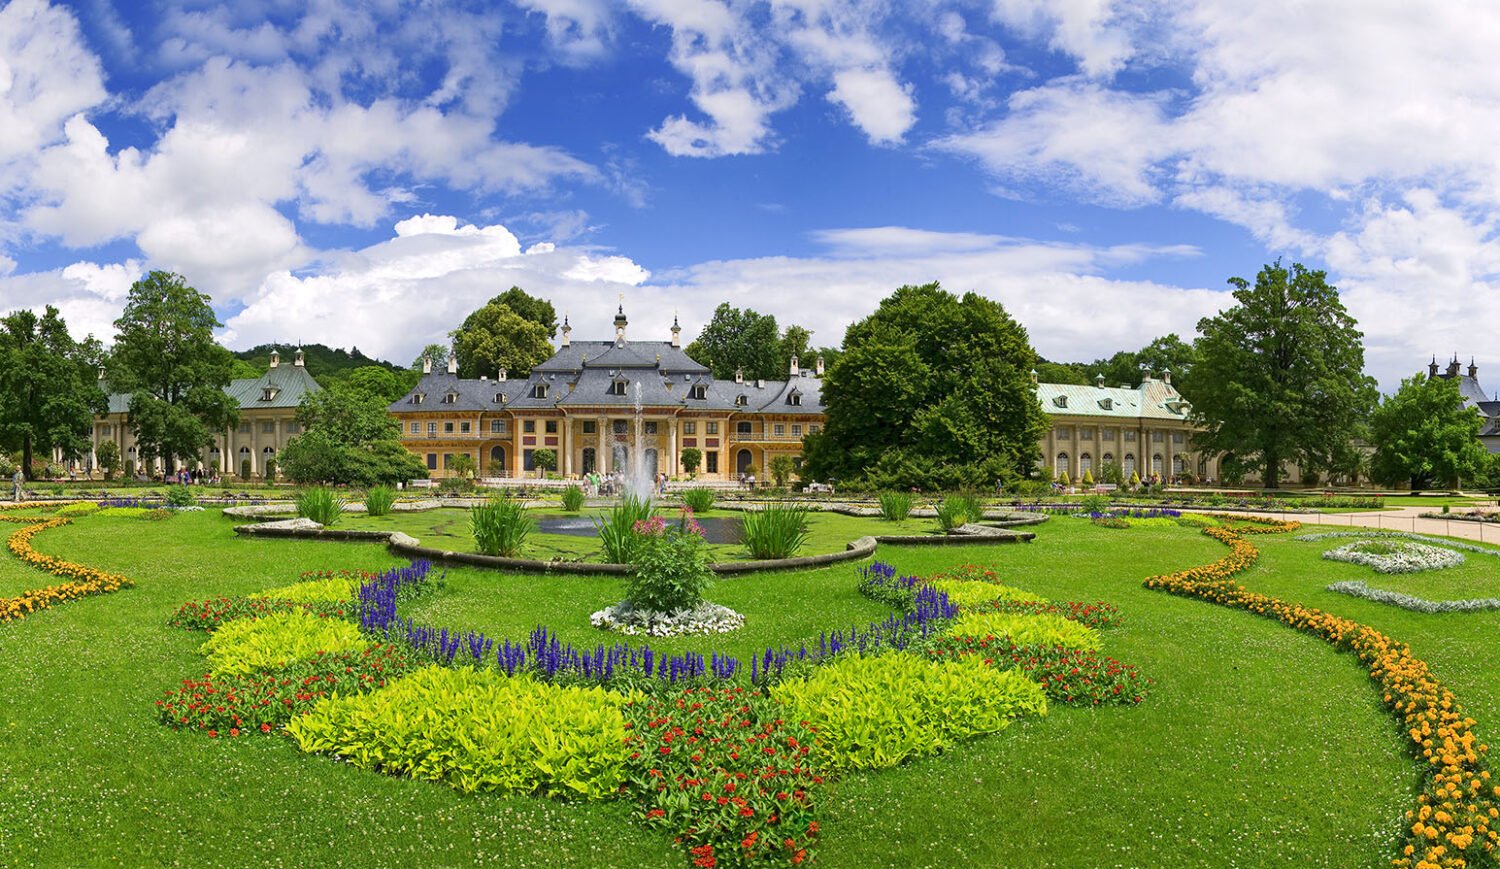 Very worth seeing - the gardens of Pillnitz Palace